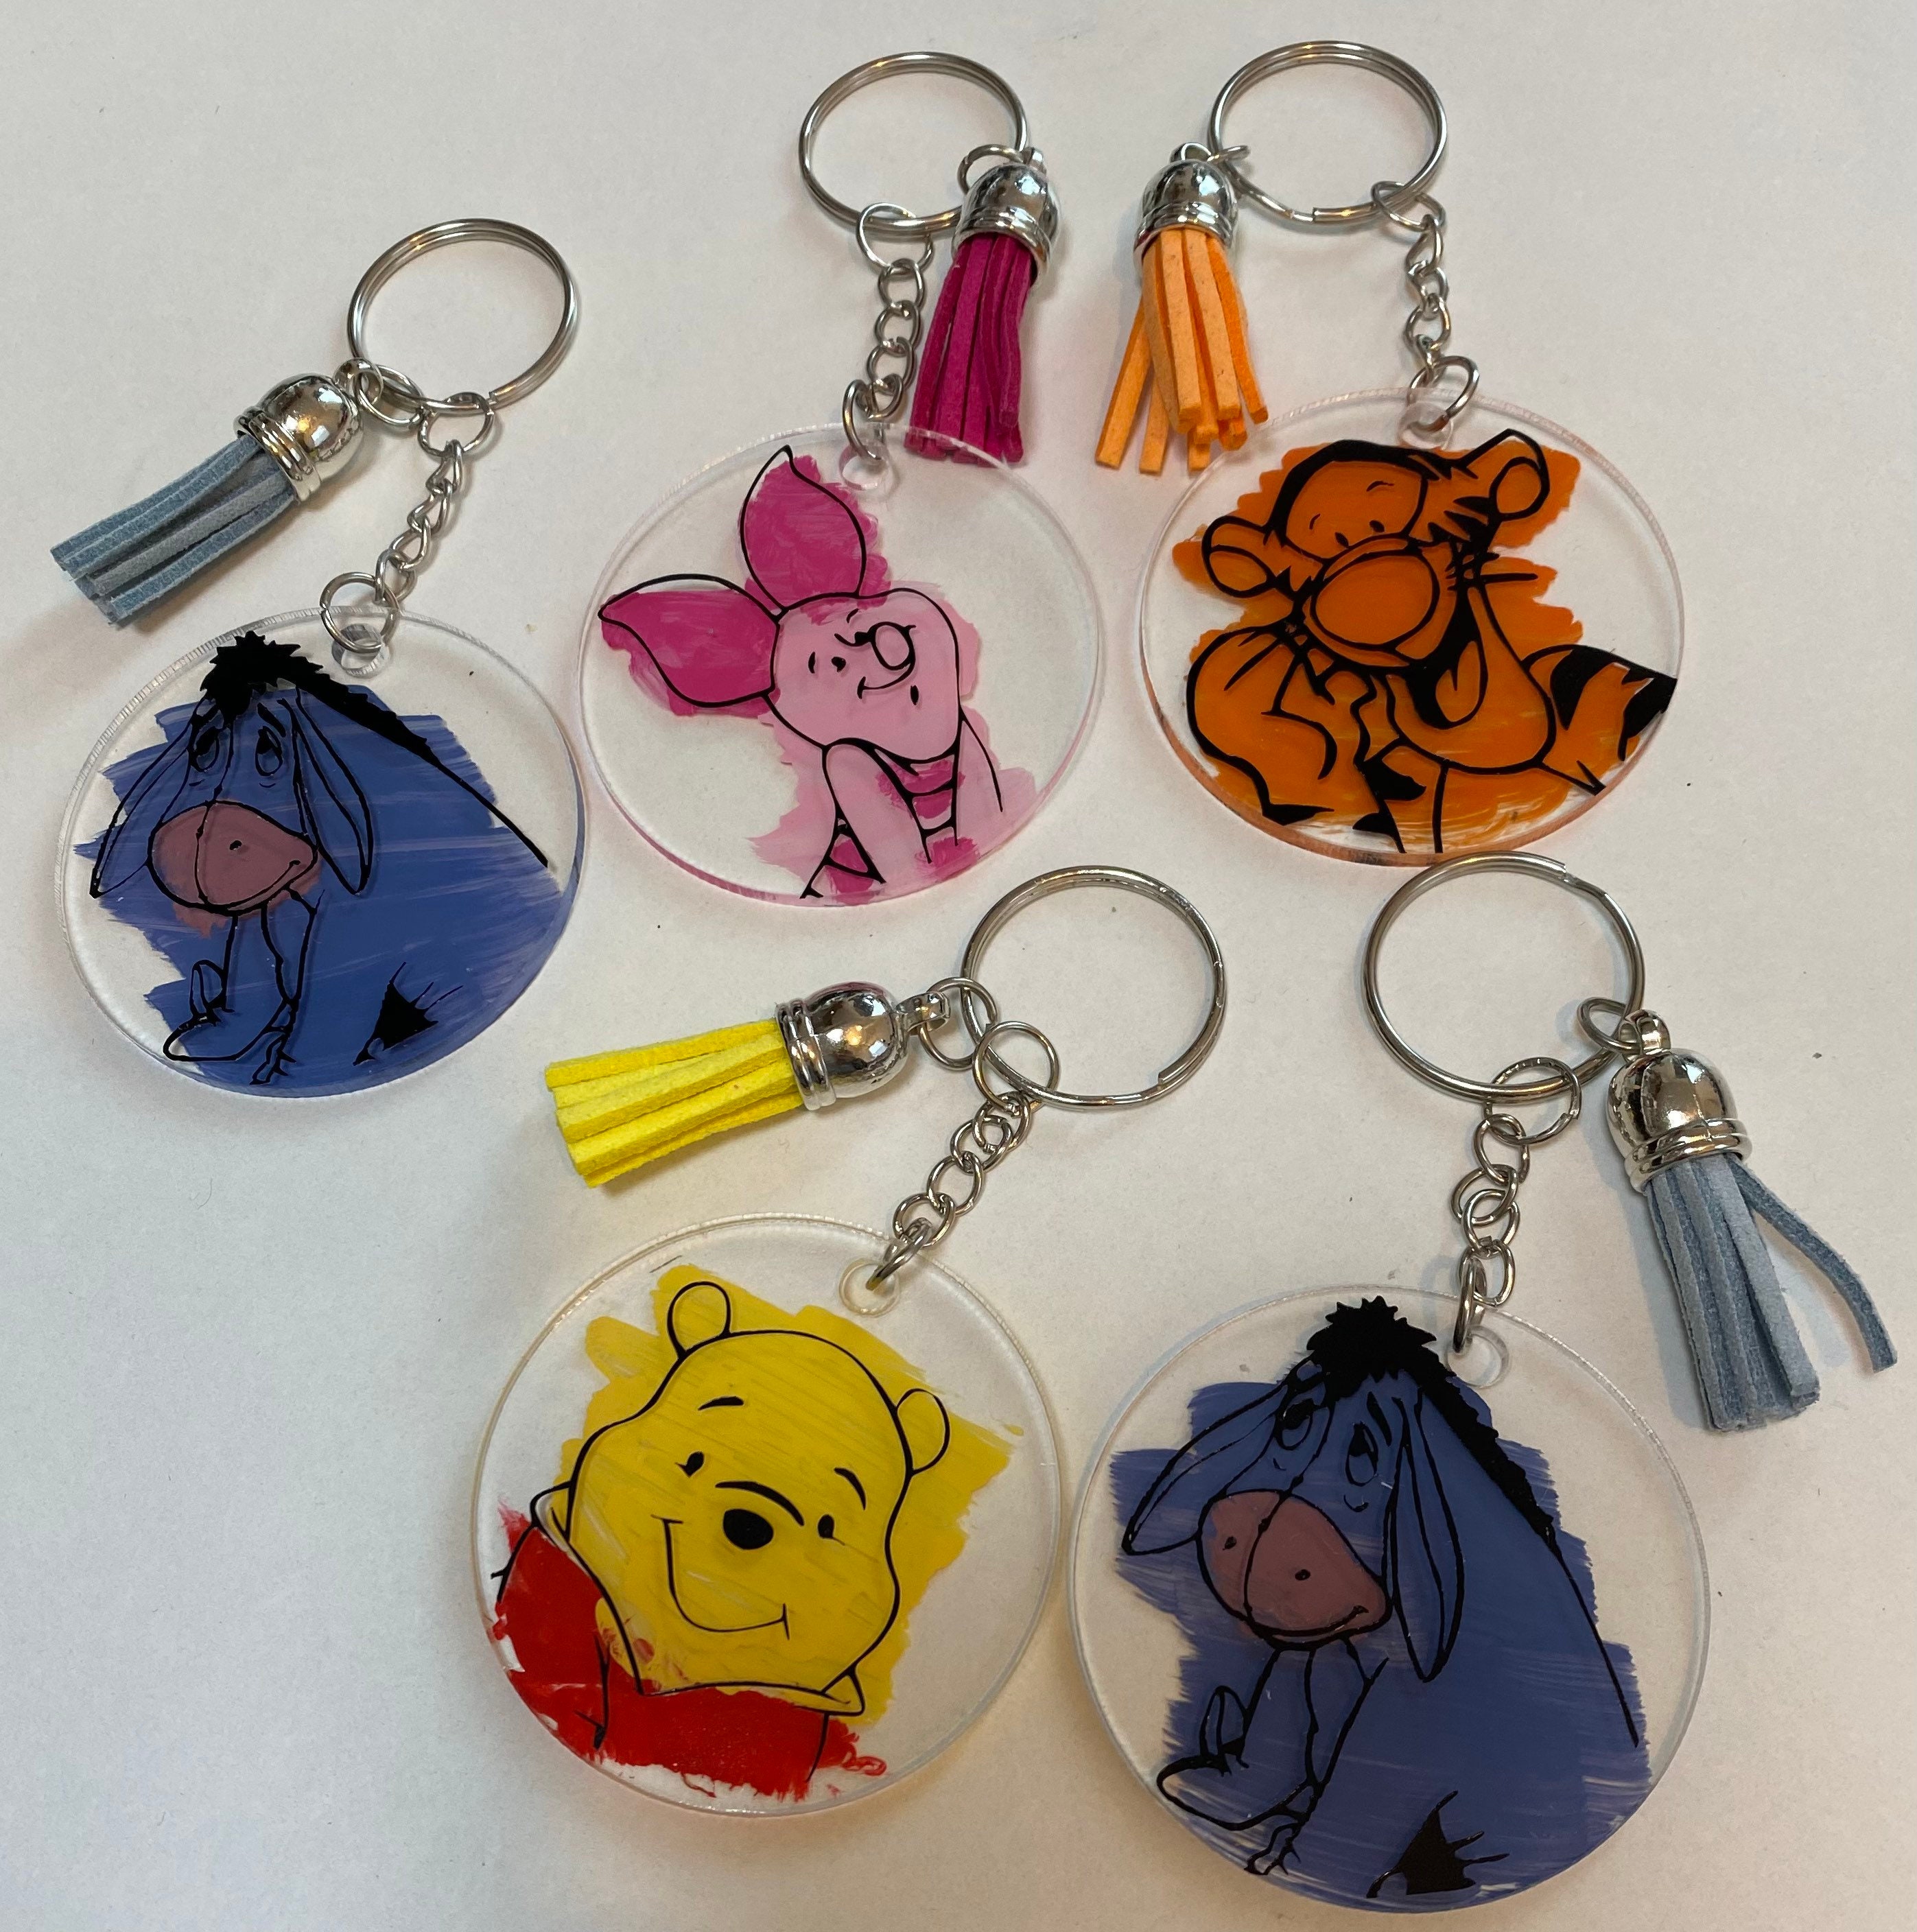 Winnie the Pooh Tiger Piglet inspired keyring keychain gift 546 